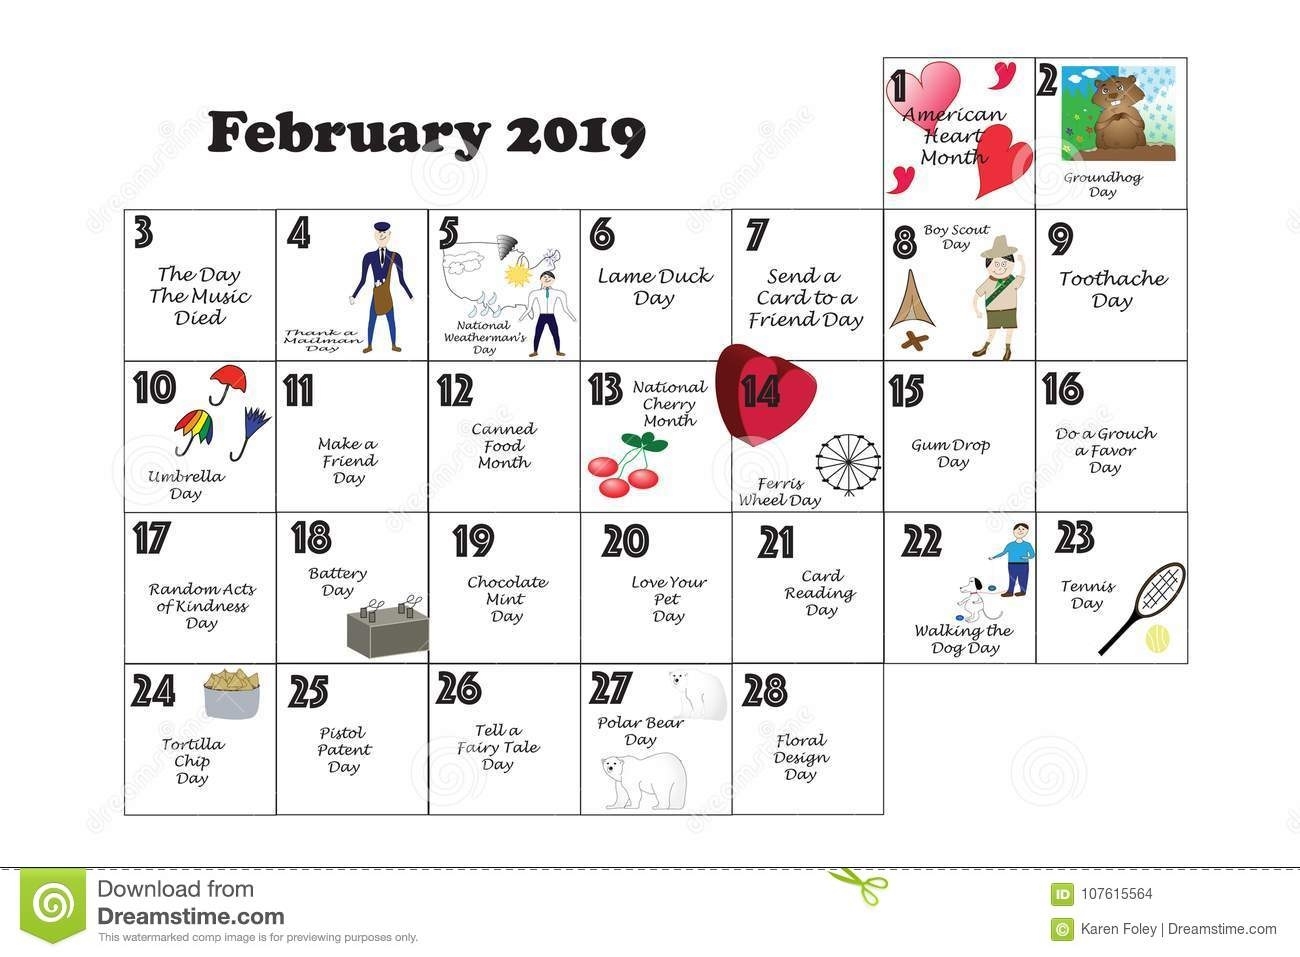 February Quirky Holidays And Unusual Events 2019 Stock Illustration Calendar Holidays And Events